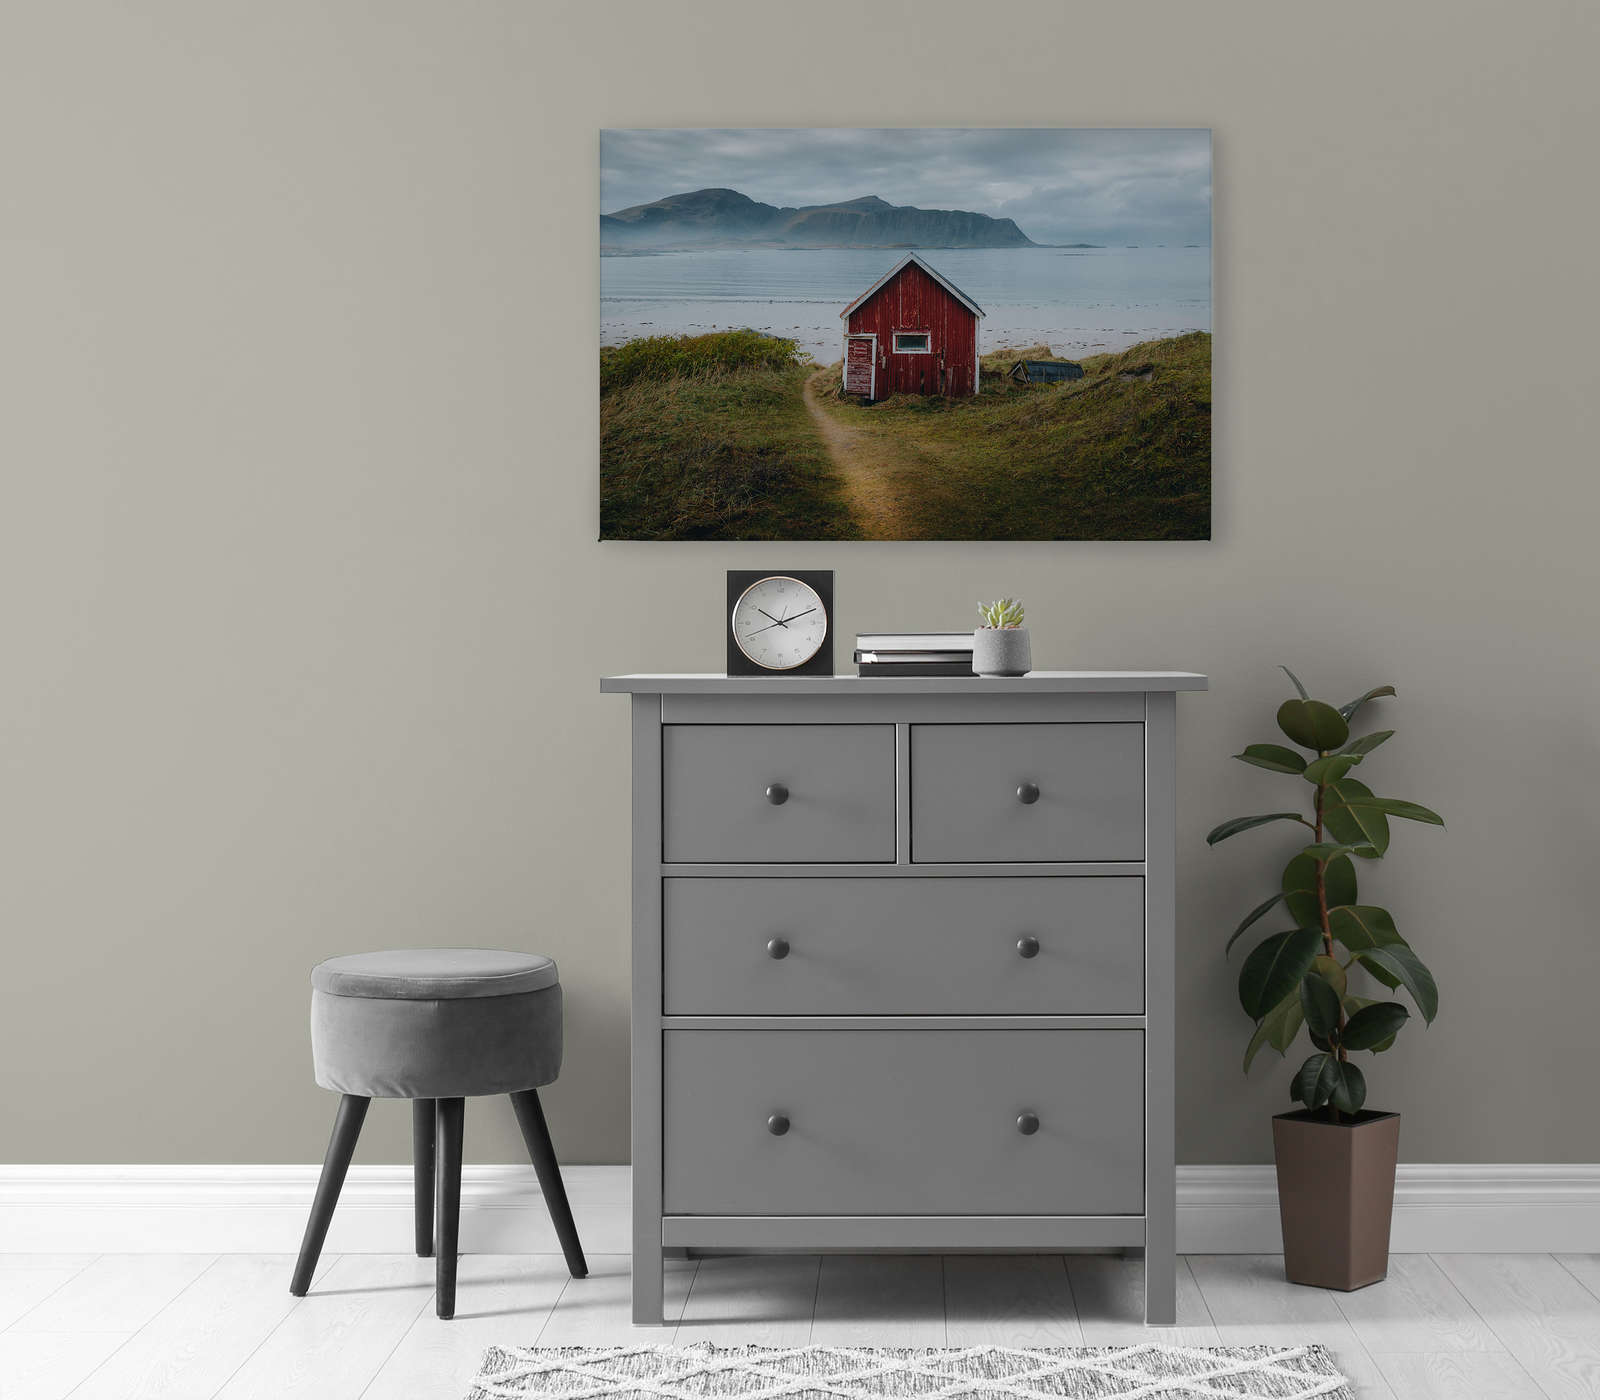             Canvas painting Landscape picture with red hut at the sea - 0,90 m x 0,60 m
        